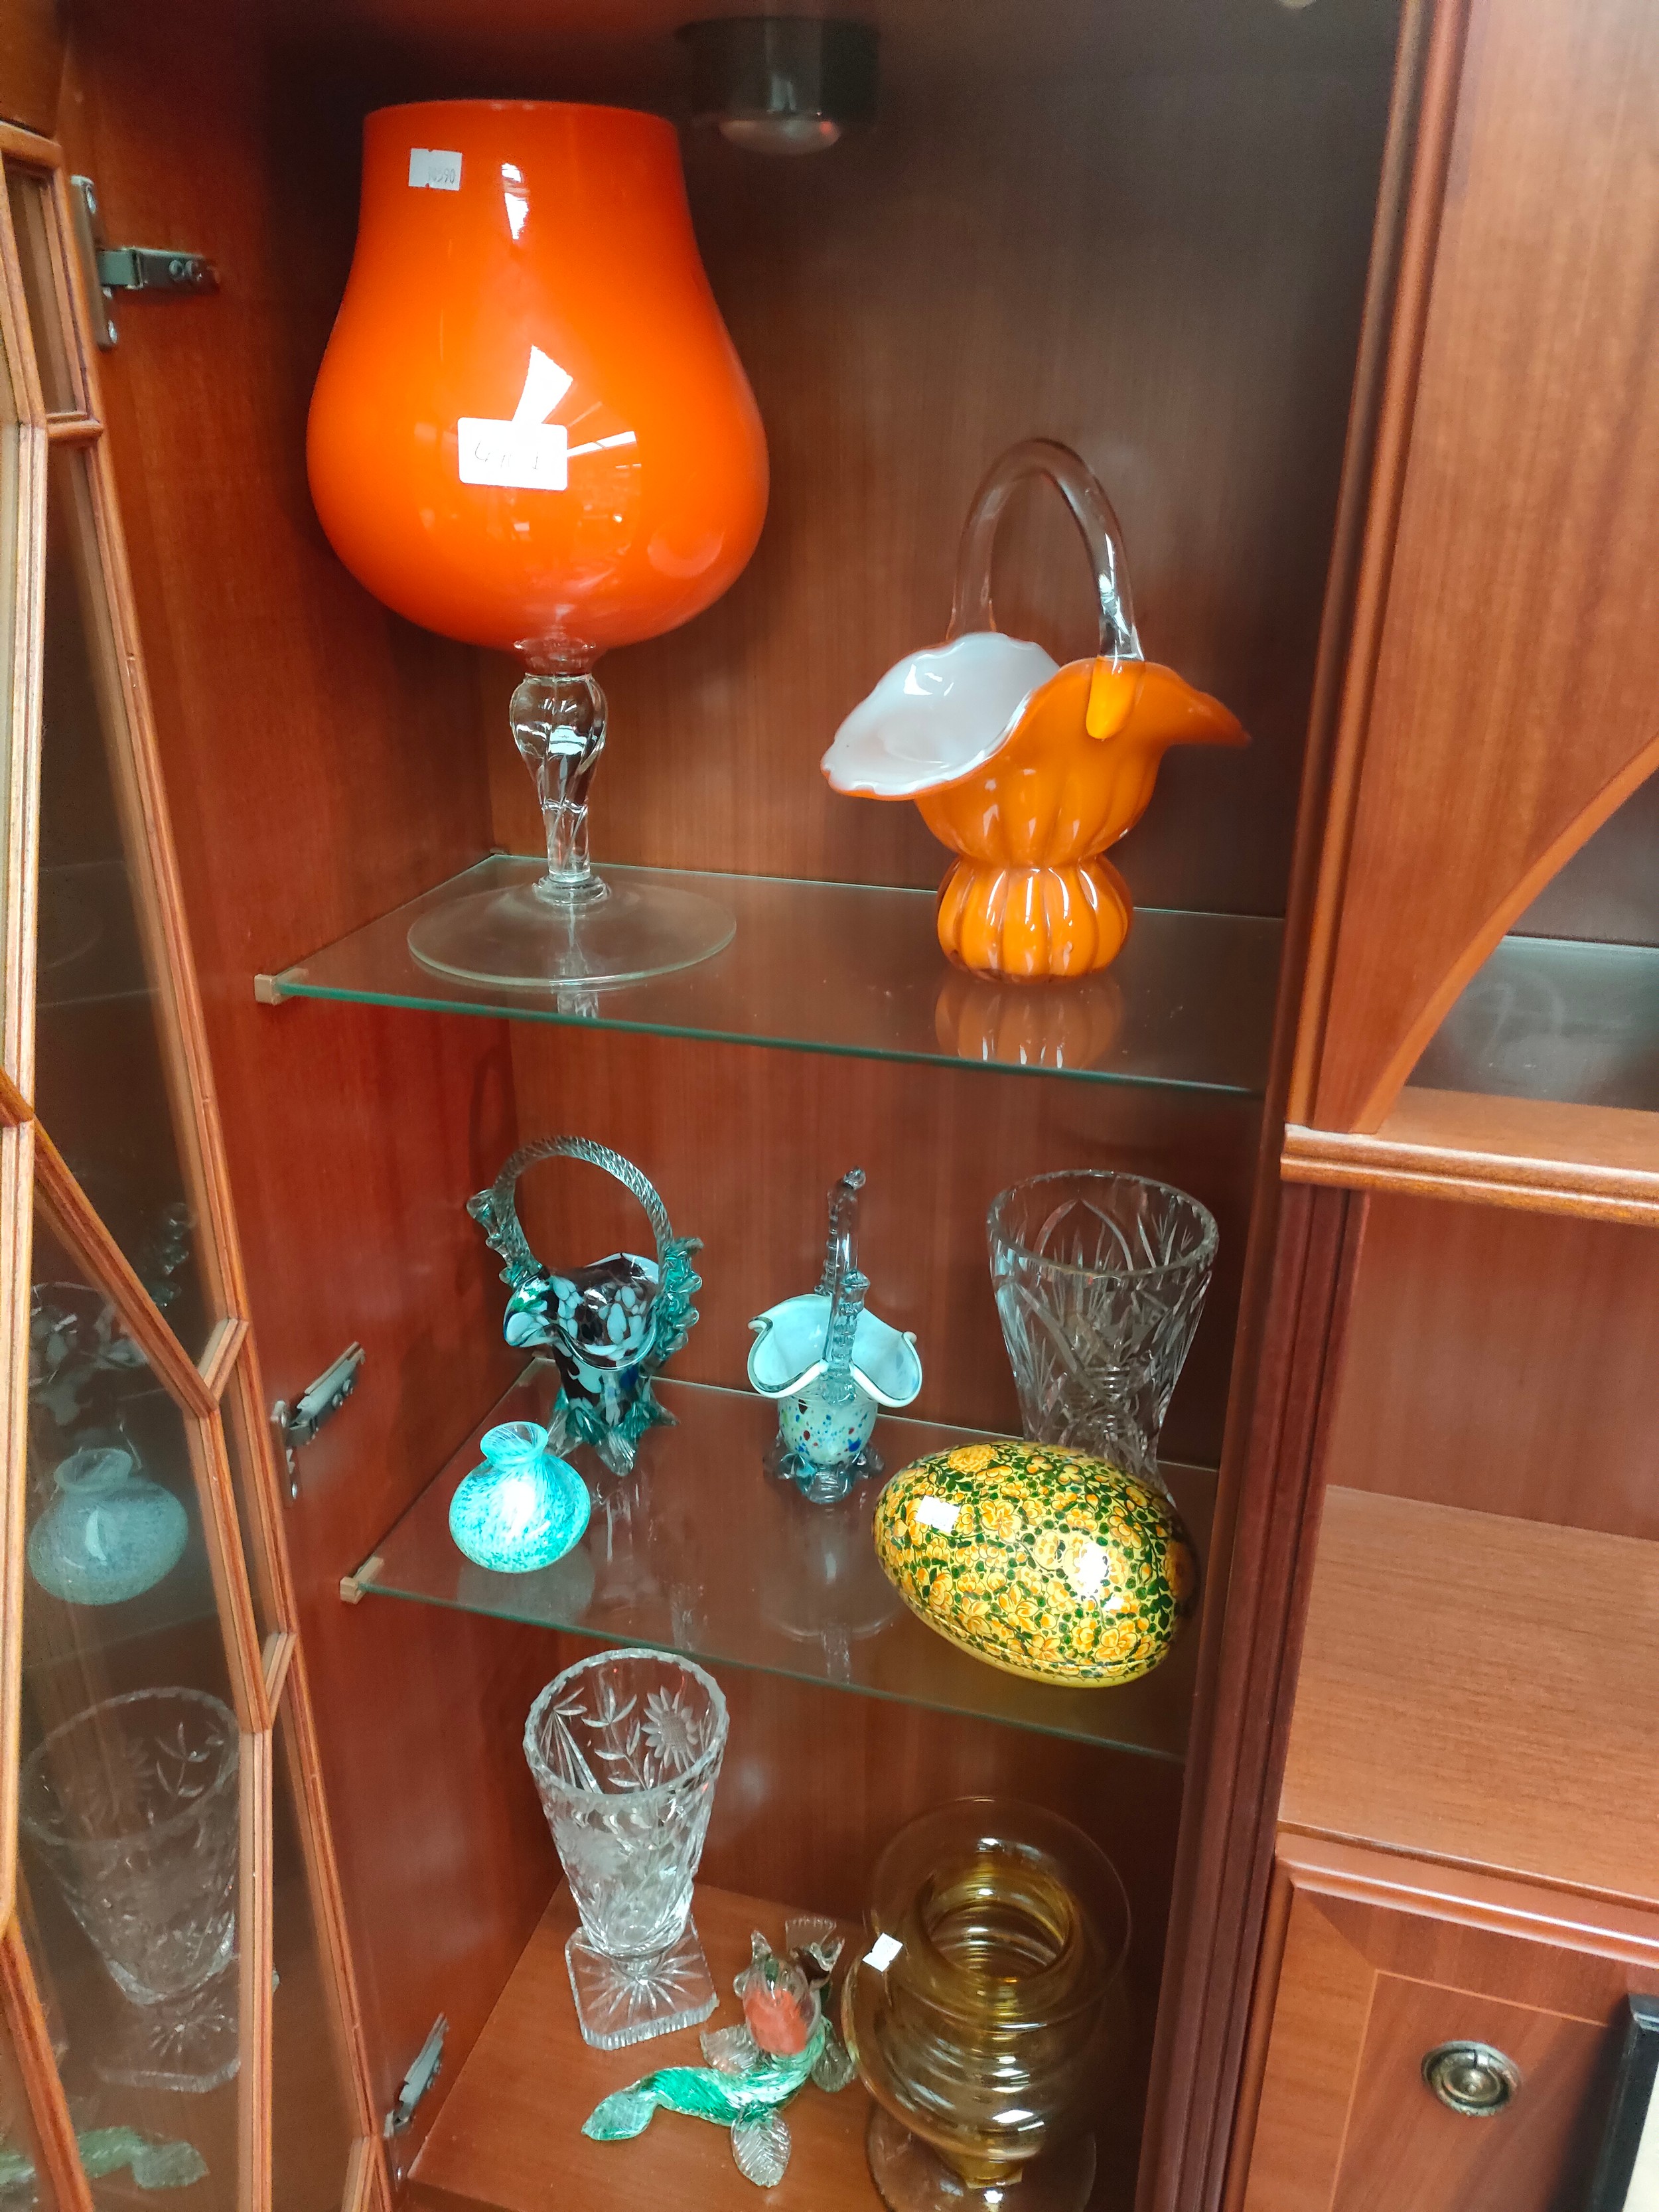 A Selection of art glass collectables to include heavy amber coloured vase etc